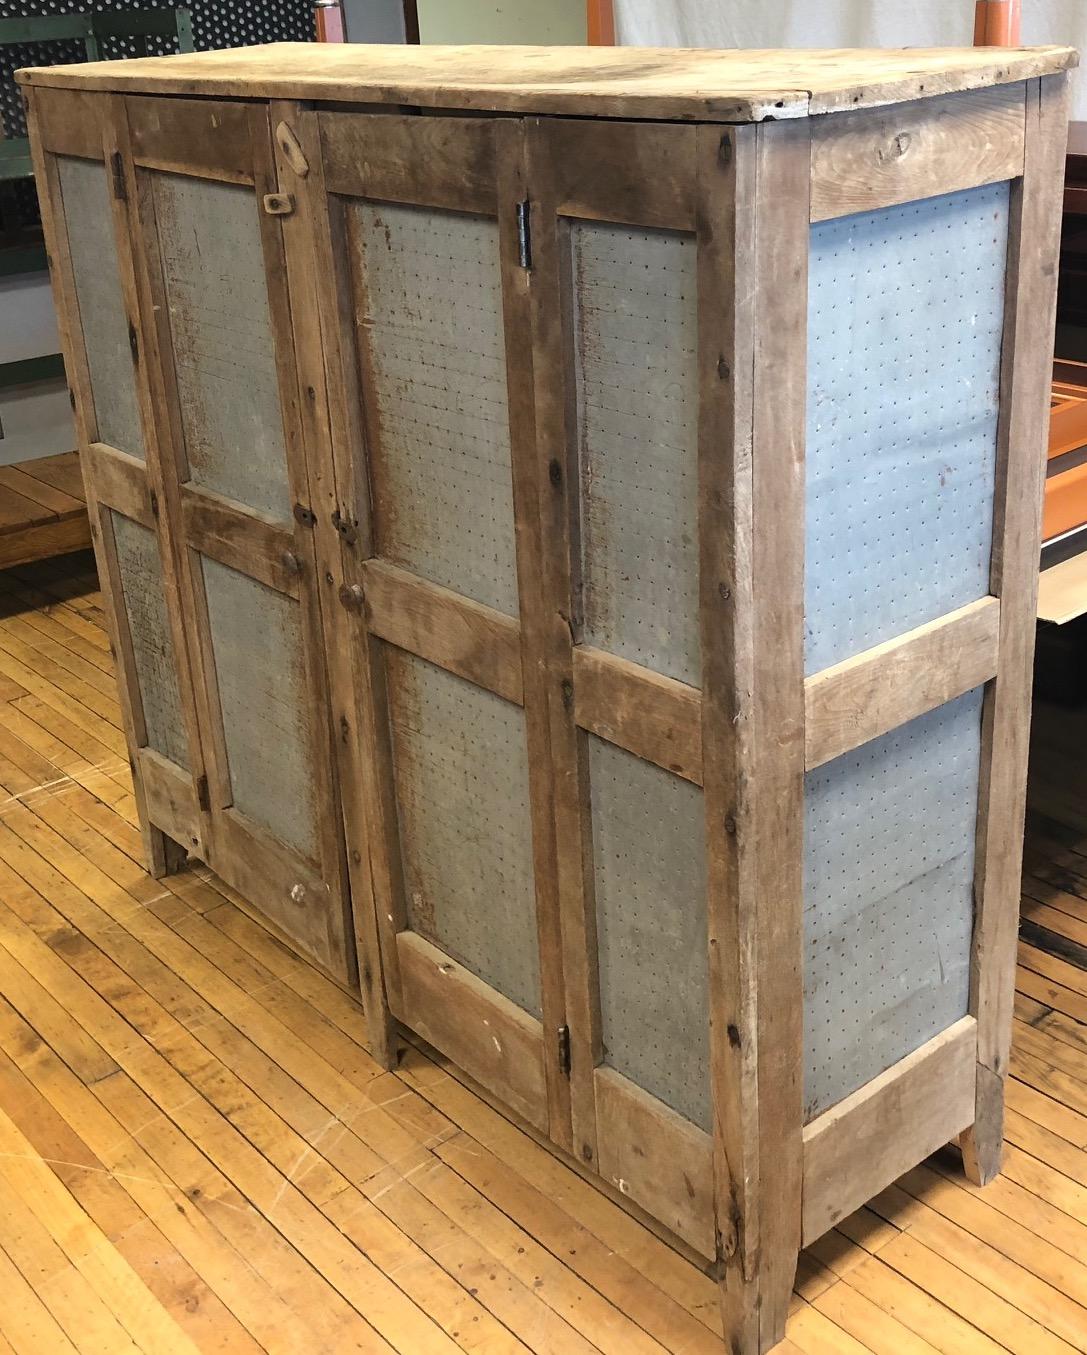 Storage cabinet, meat safe of unvarnished walnut used by the Amish to store smoked and preserved meat. With original square nail hardware, circa late 1800s. The Amish did not have electricity or use refrigerated ice box/freezers. They would smoke